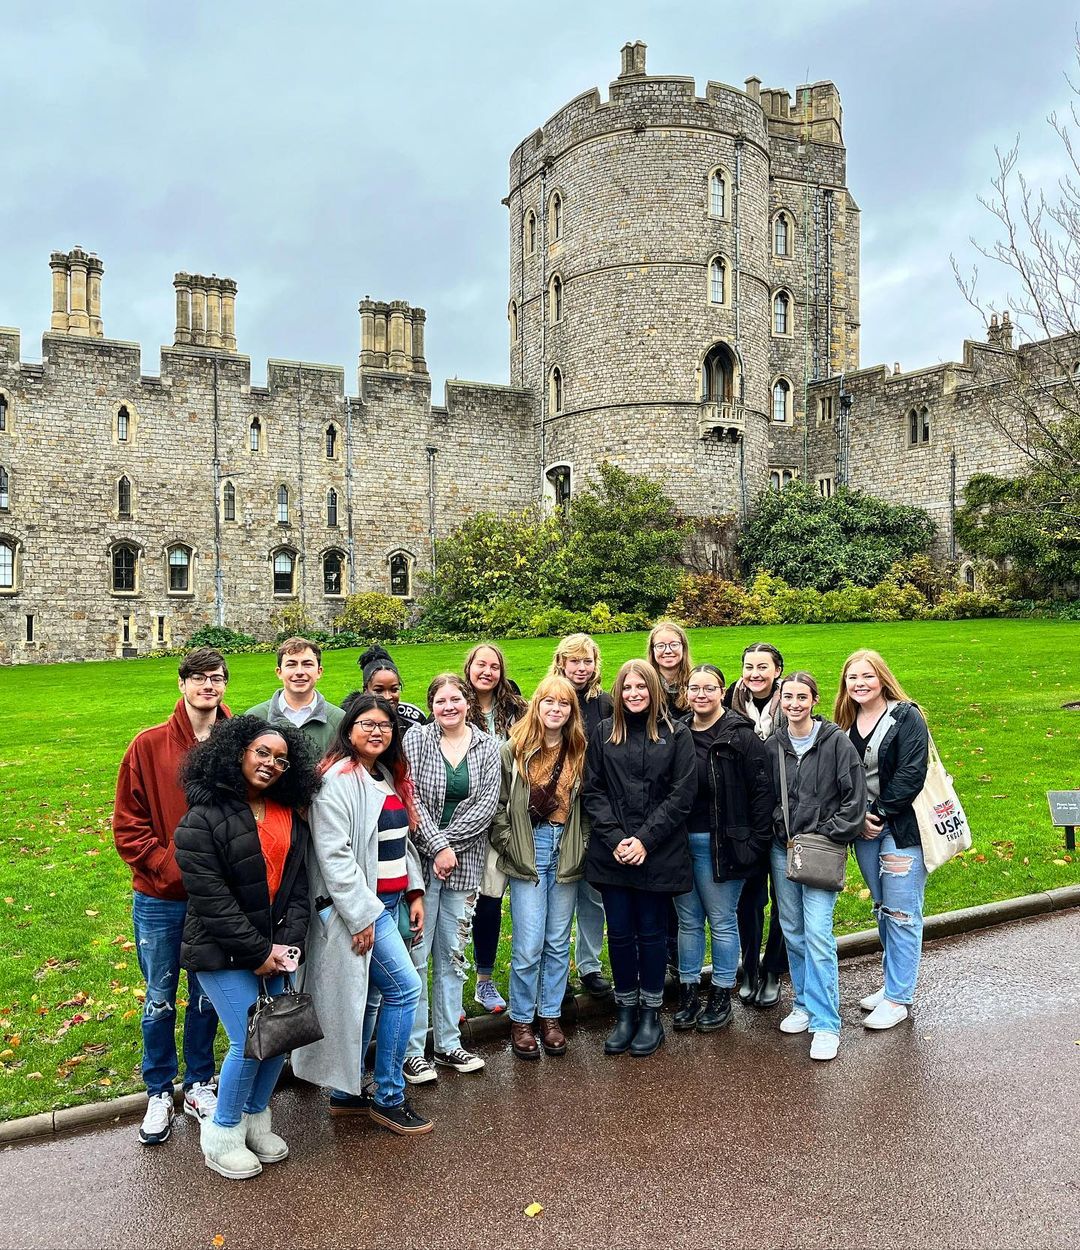 Students on a field trip standing in front of Windsor Castle in England.